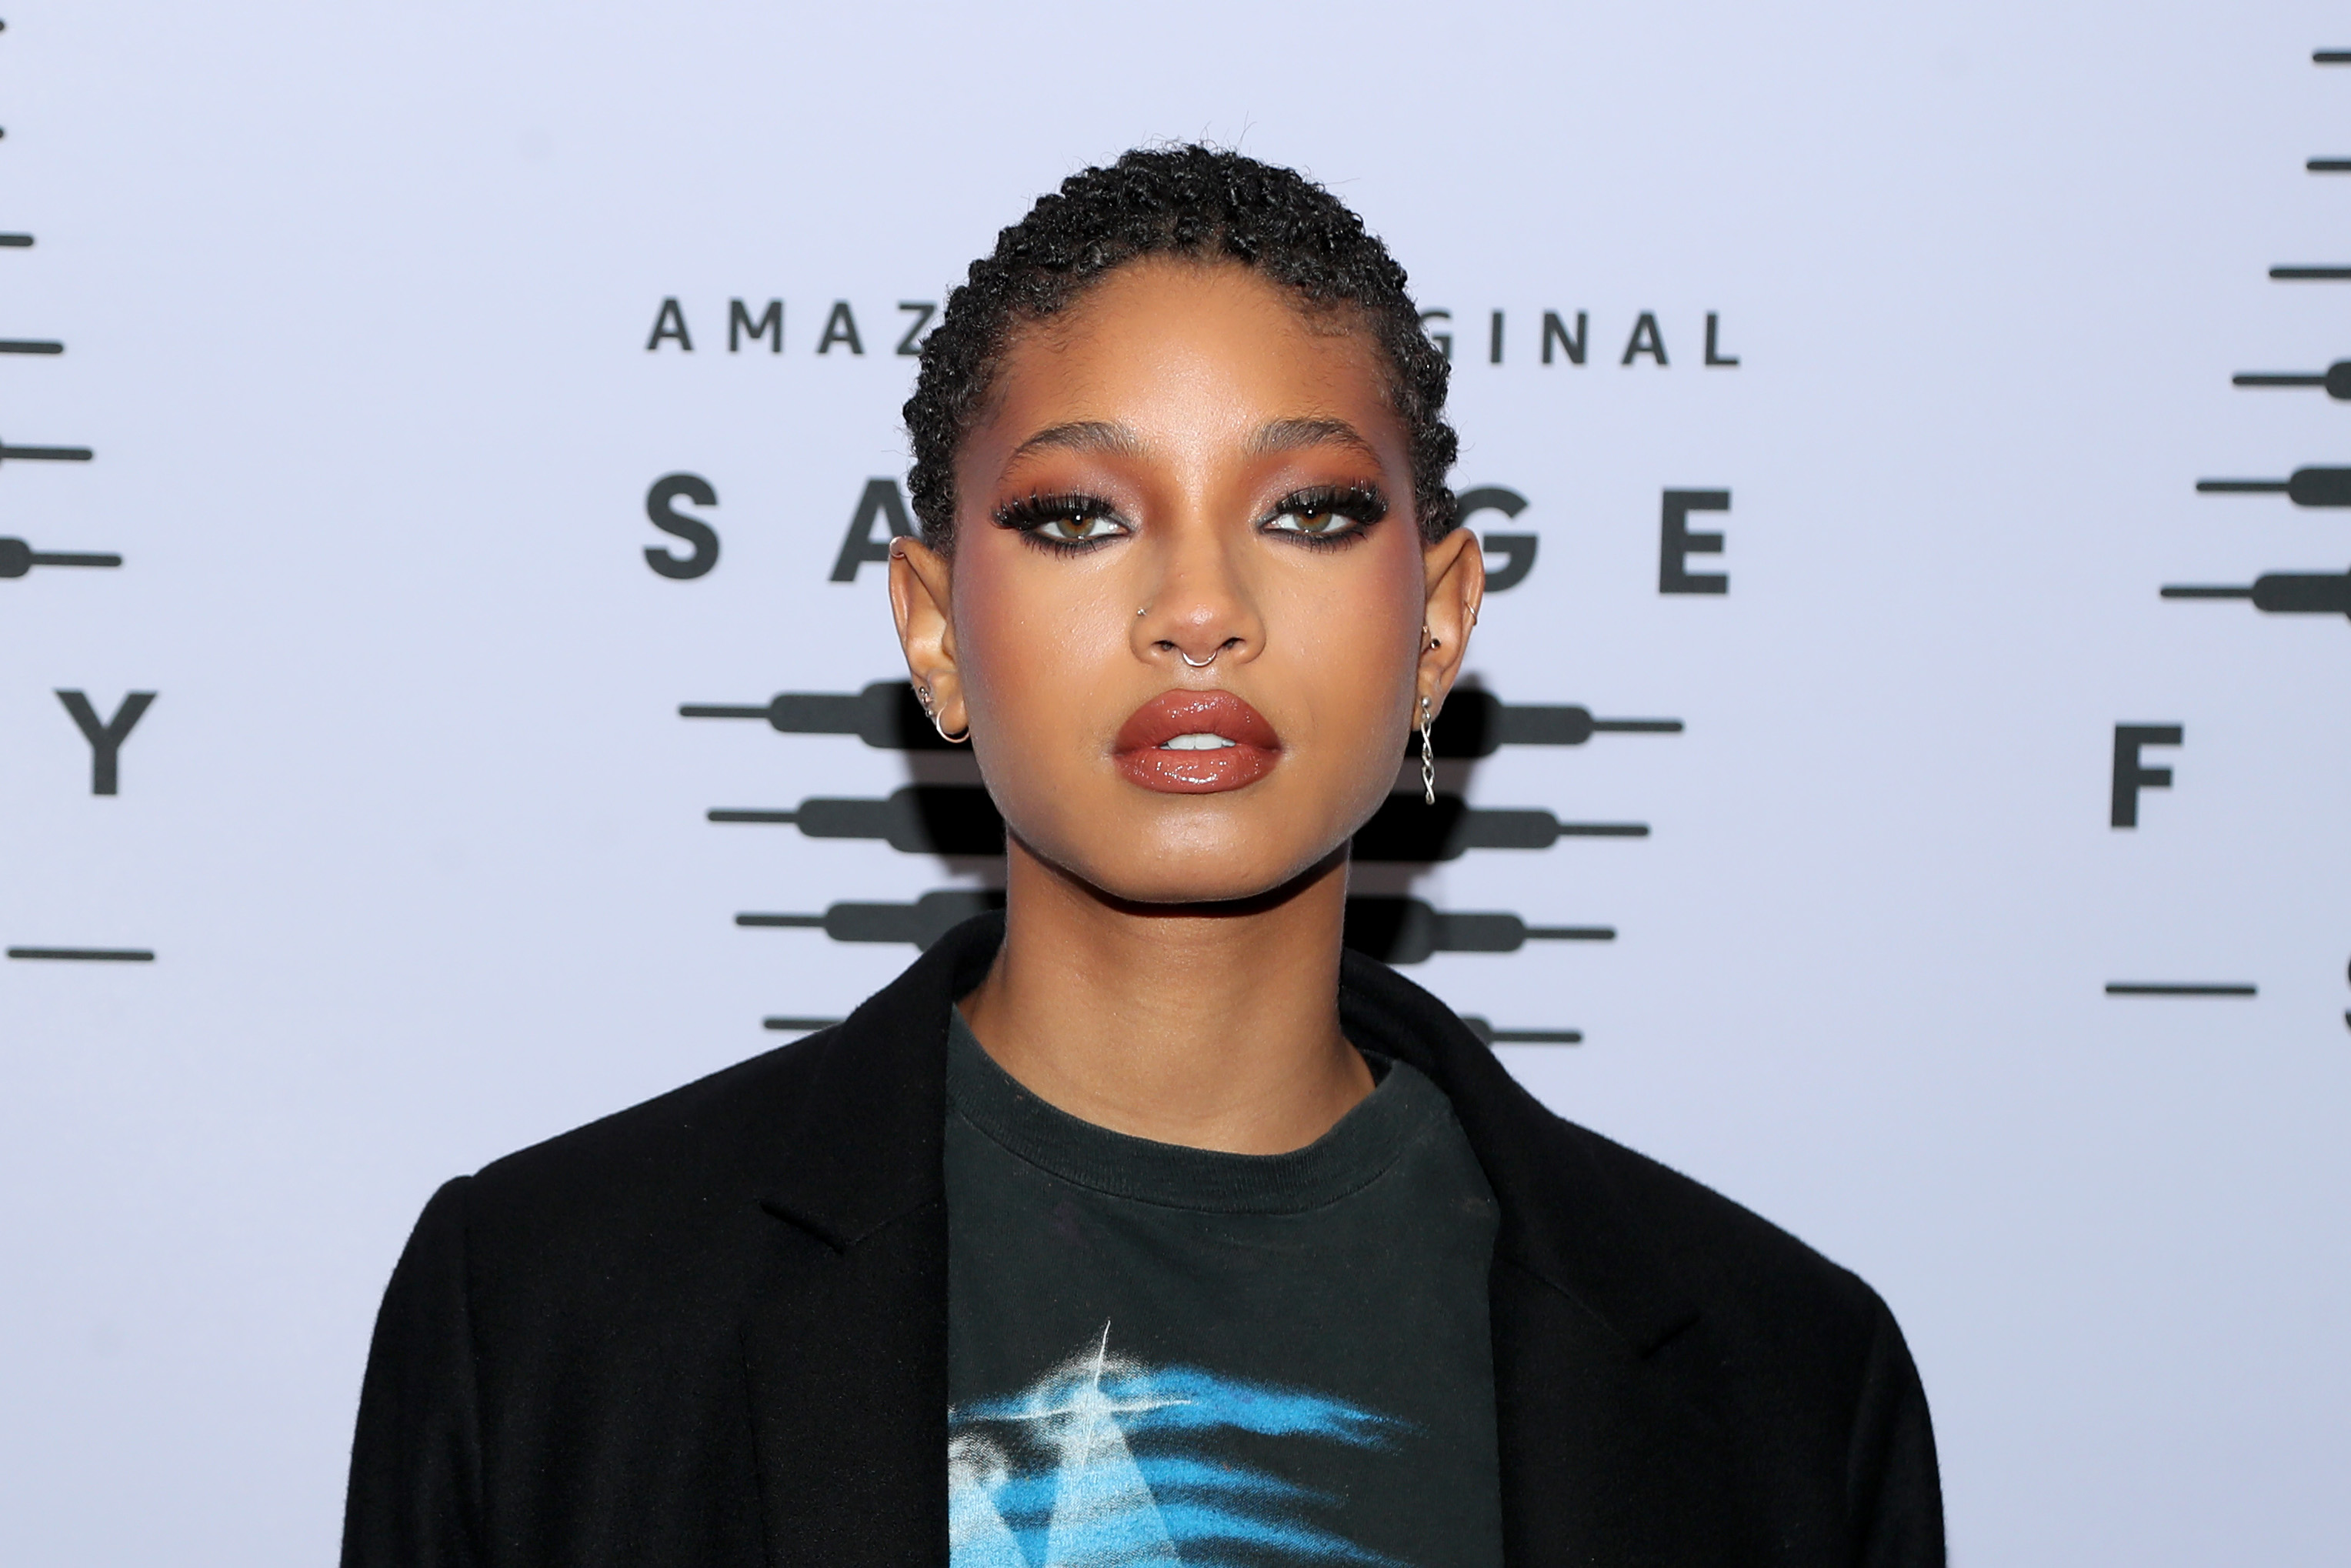 Willow Smith on the red carpet